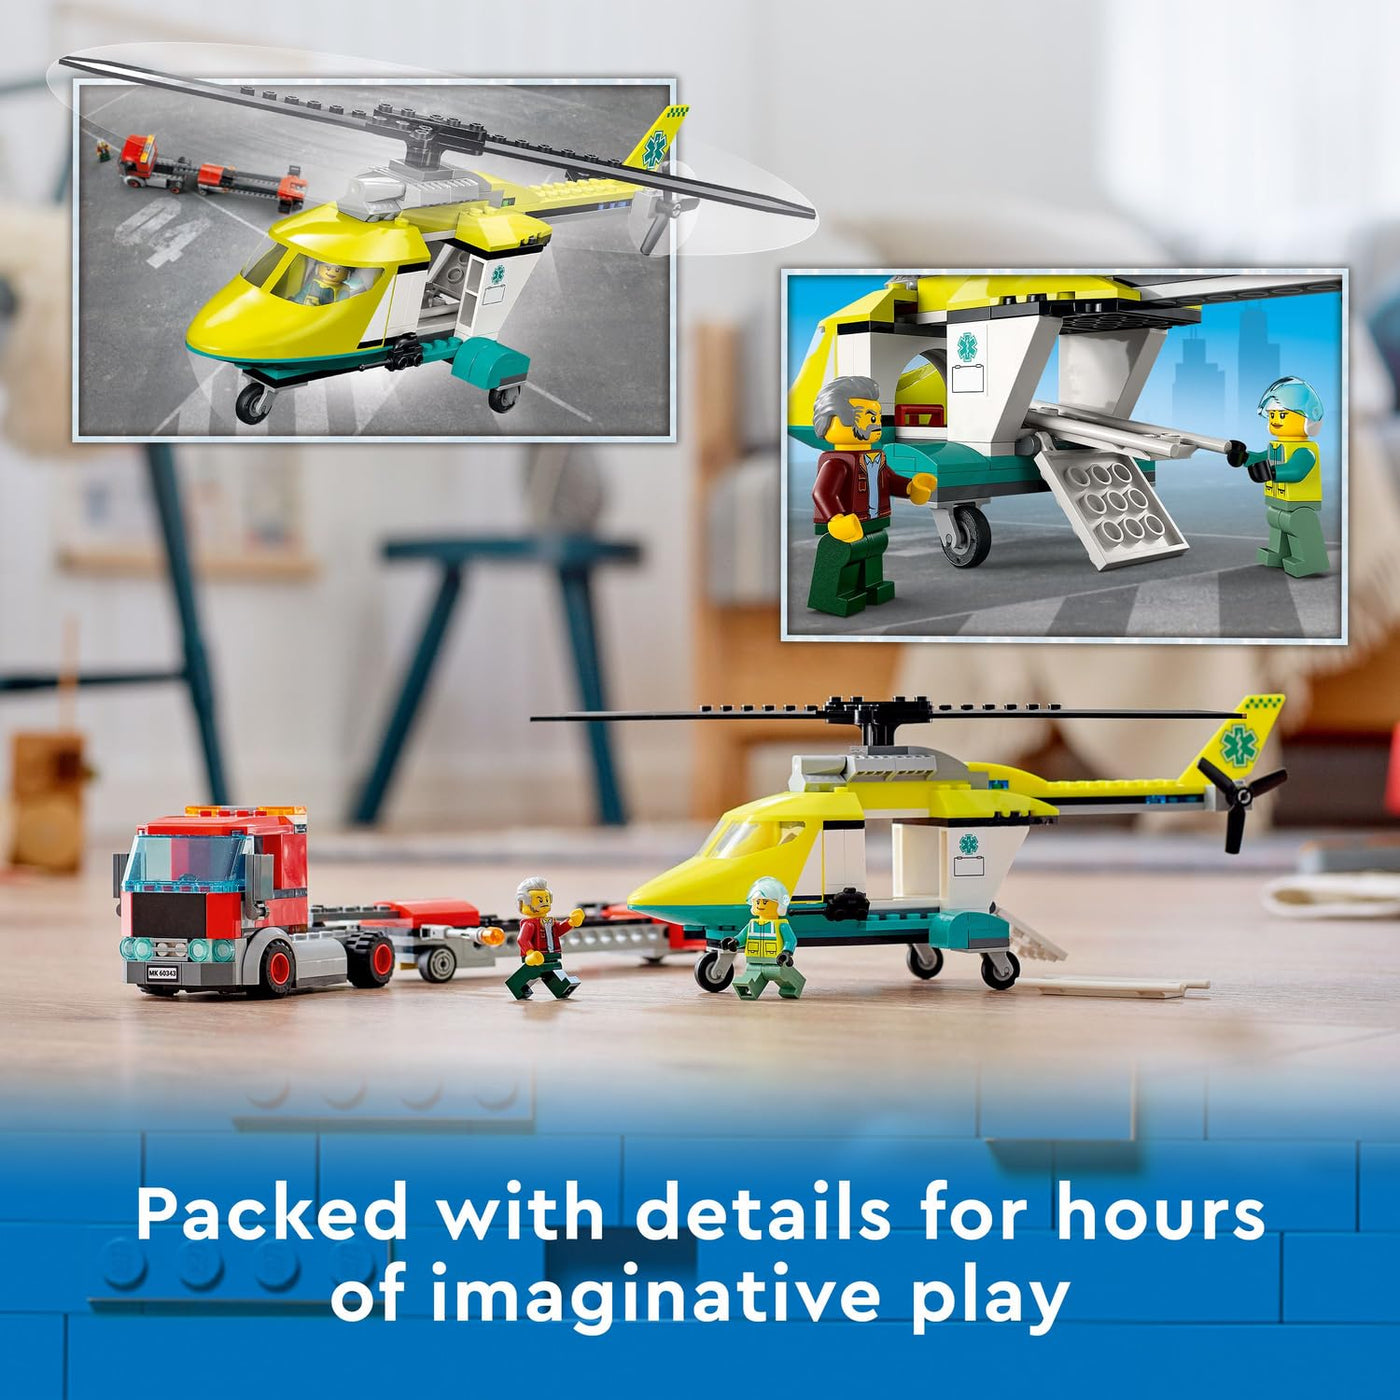 LEGO® City #60343: Rescue Helicopter Transport